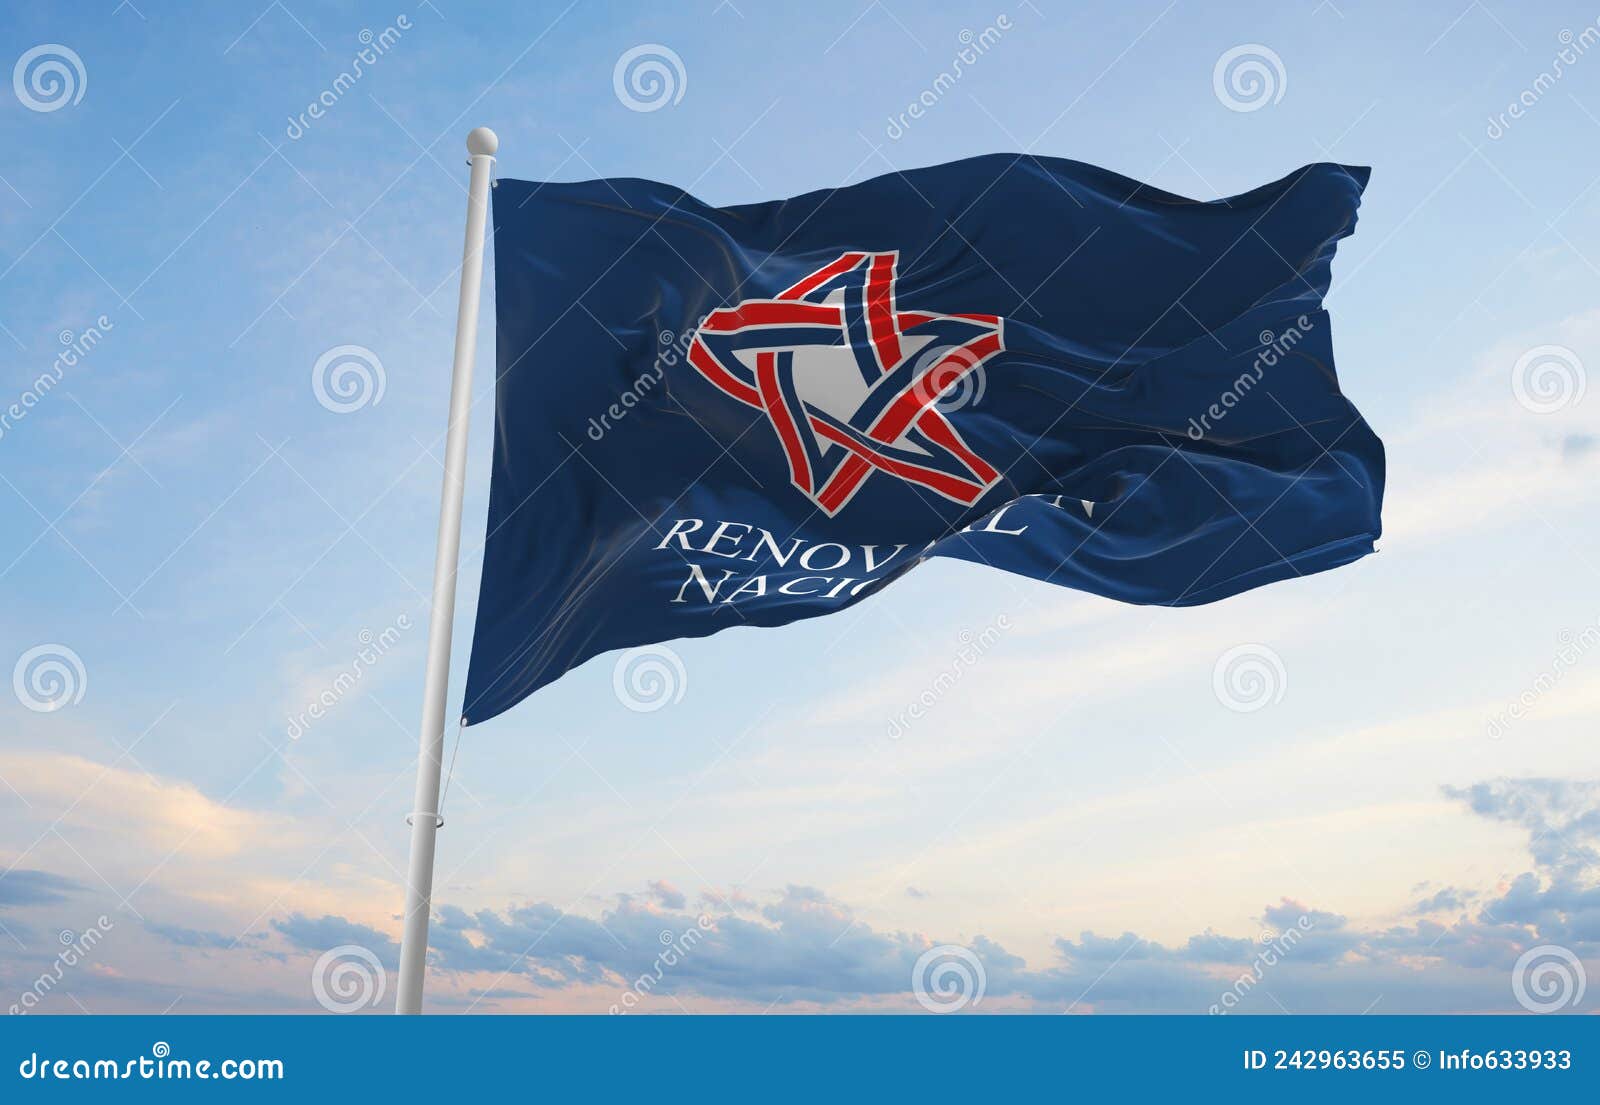 flag of renovacion nacional , chile at cloudy sky background on sunset, panoramic view. chilean travel and patriot concept. copy